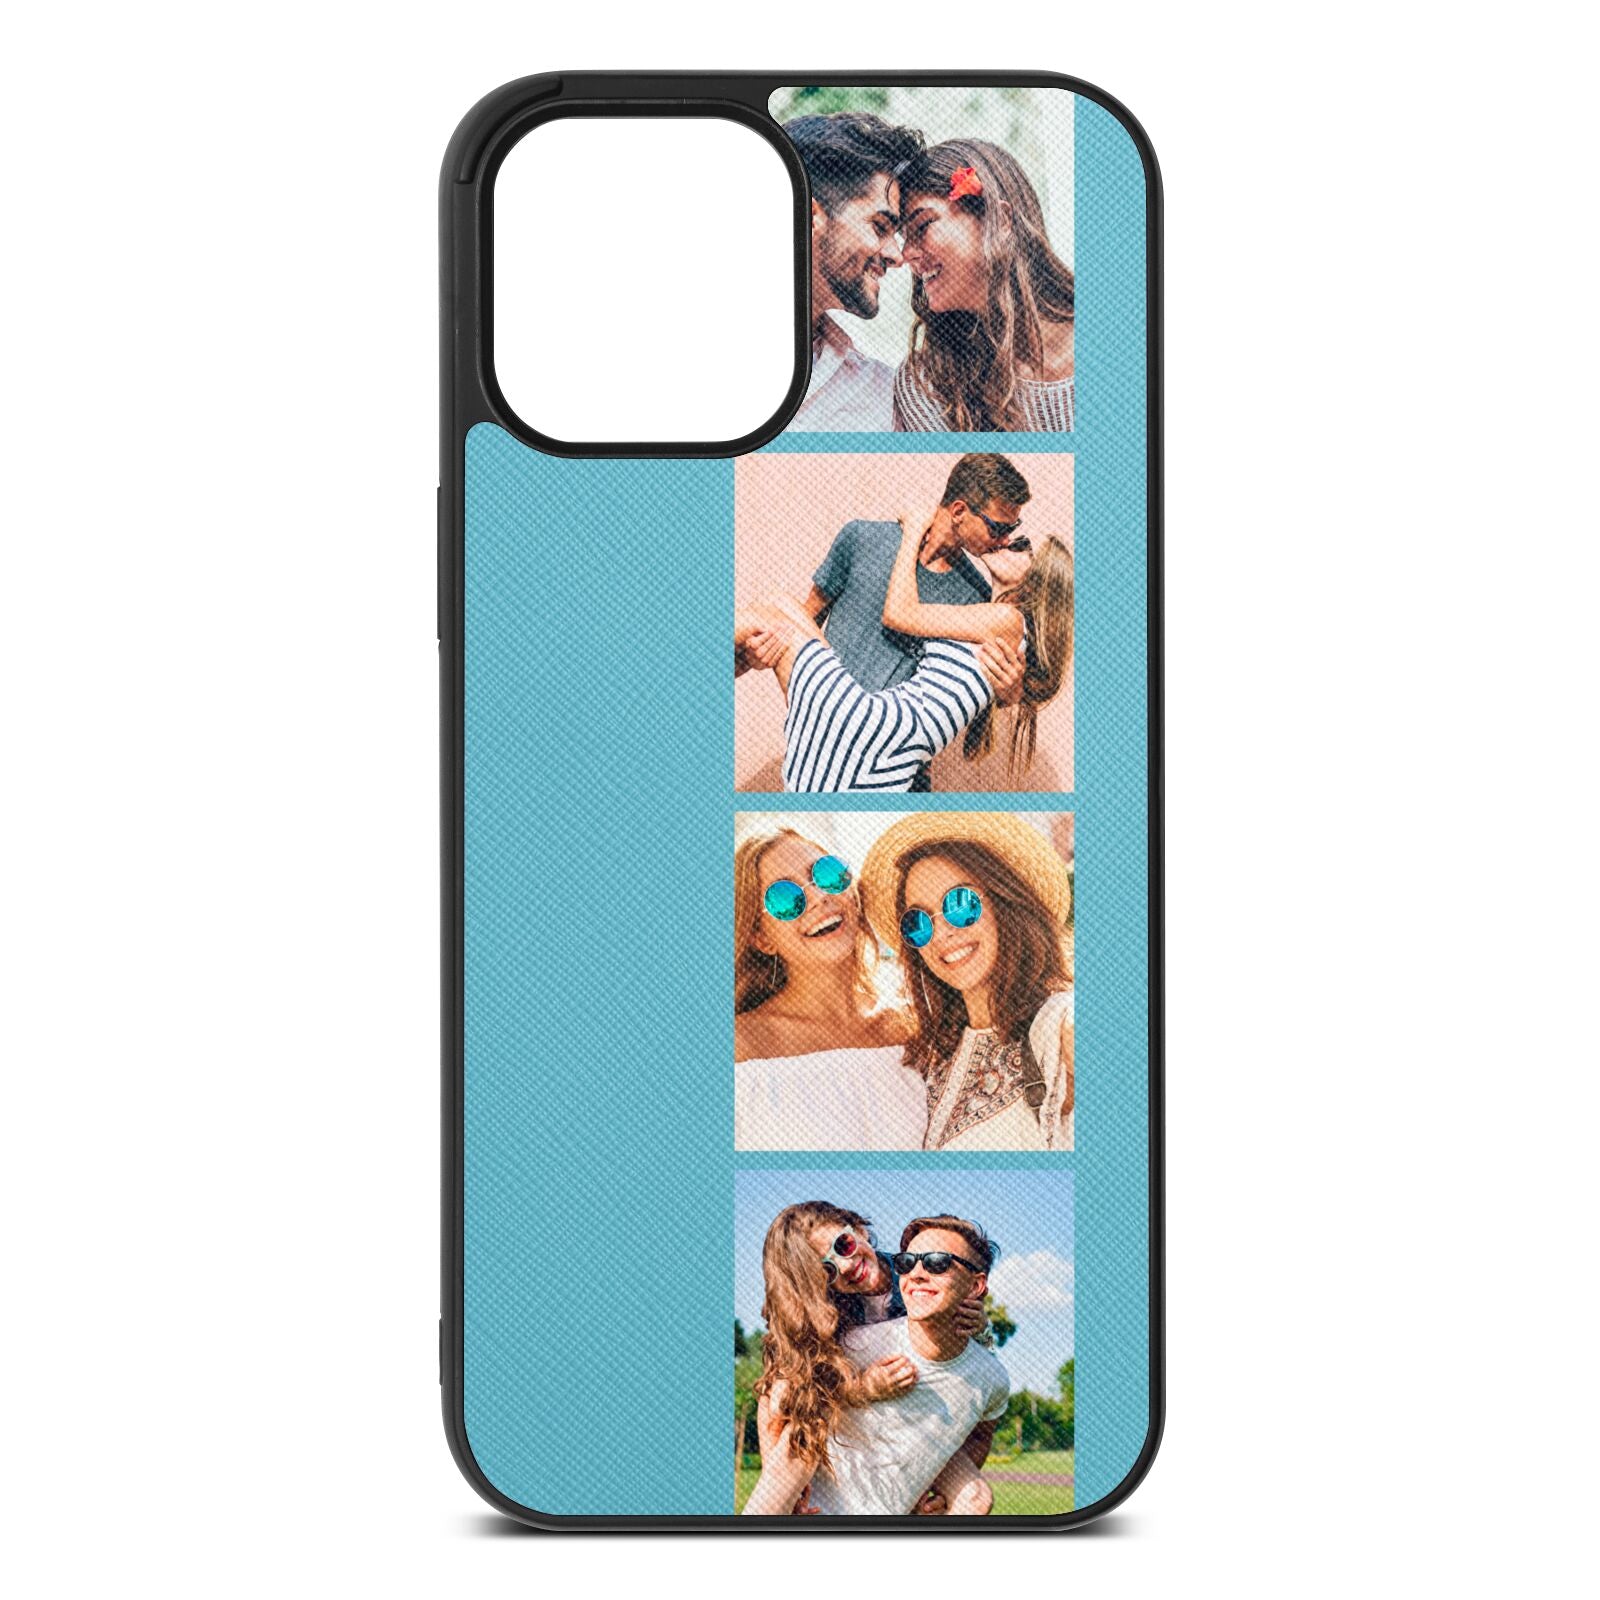 Photo Strip Montage Upload Sky Saffiano Leather iPhone 12 Pro Max Case